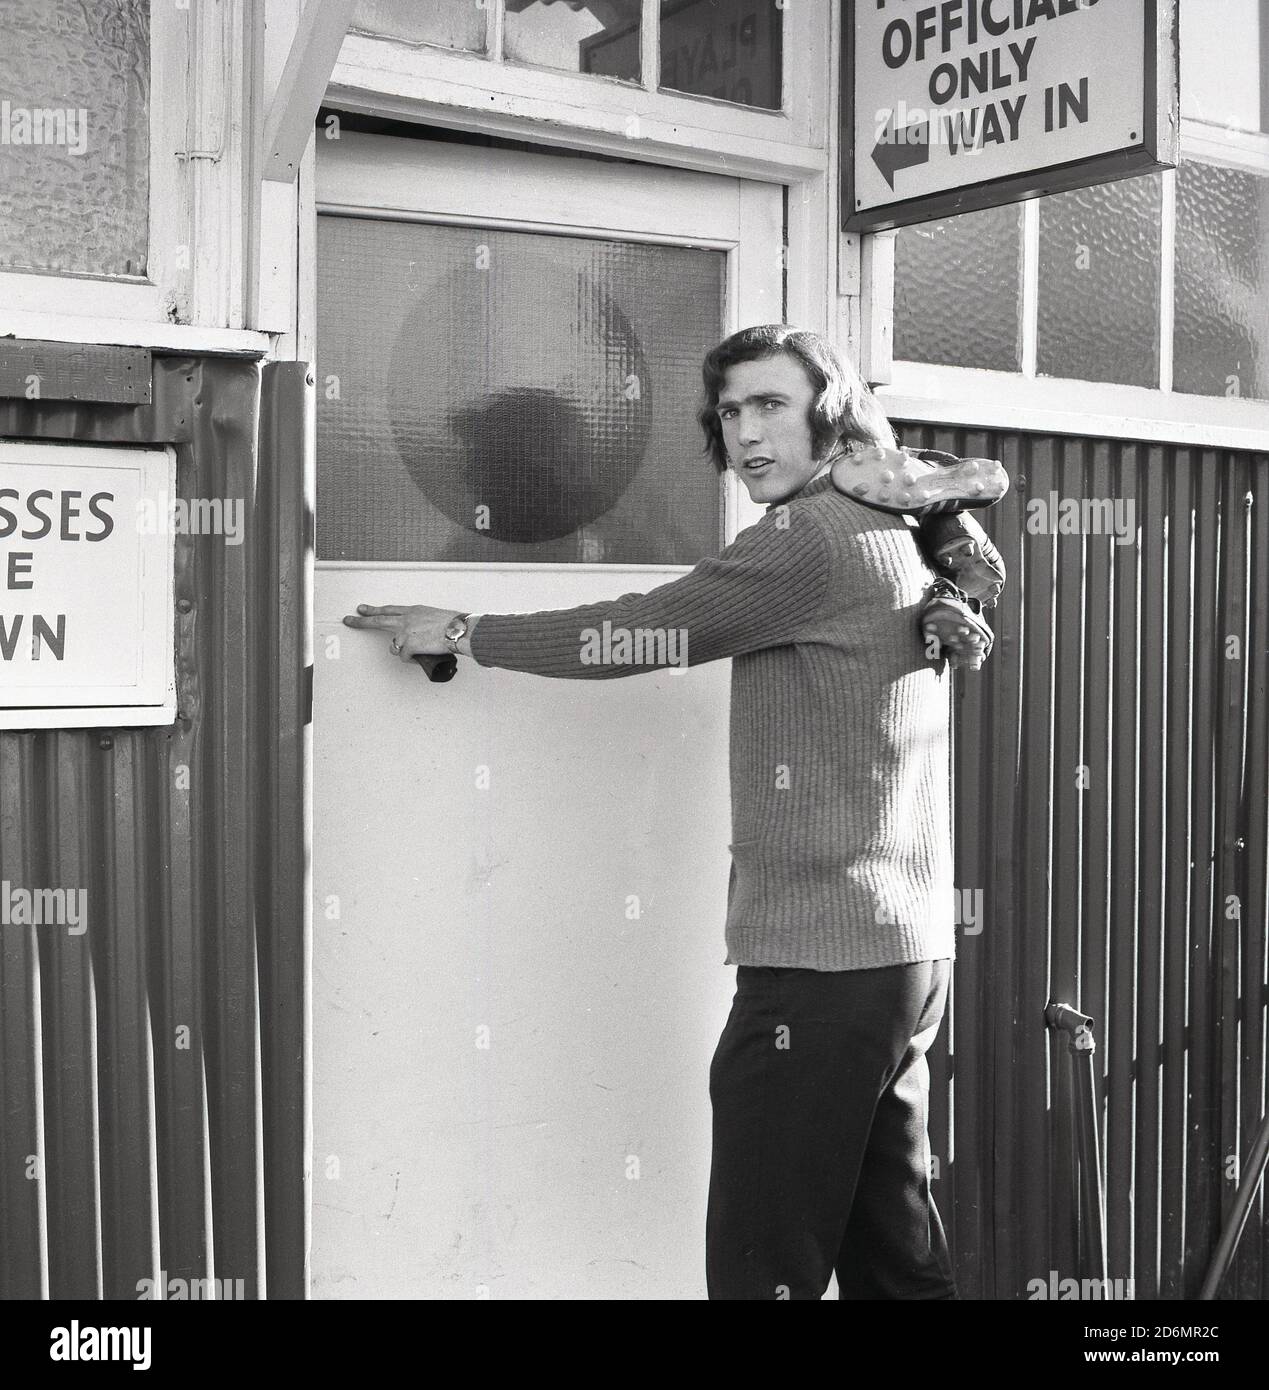 1970s, historical, a footballer of the era, causally dressed and with his boots over his shoulders entering the players and officals entrance to a fooball ground, South East London, England, UK. Stock Photo